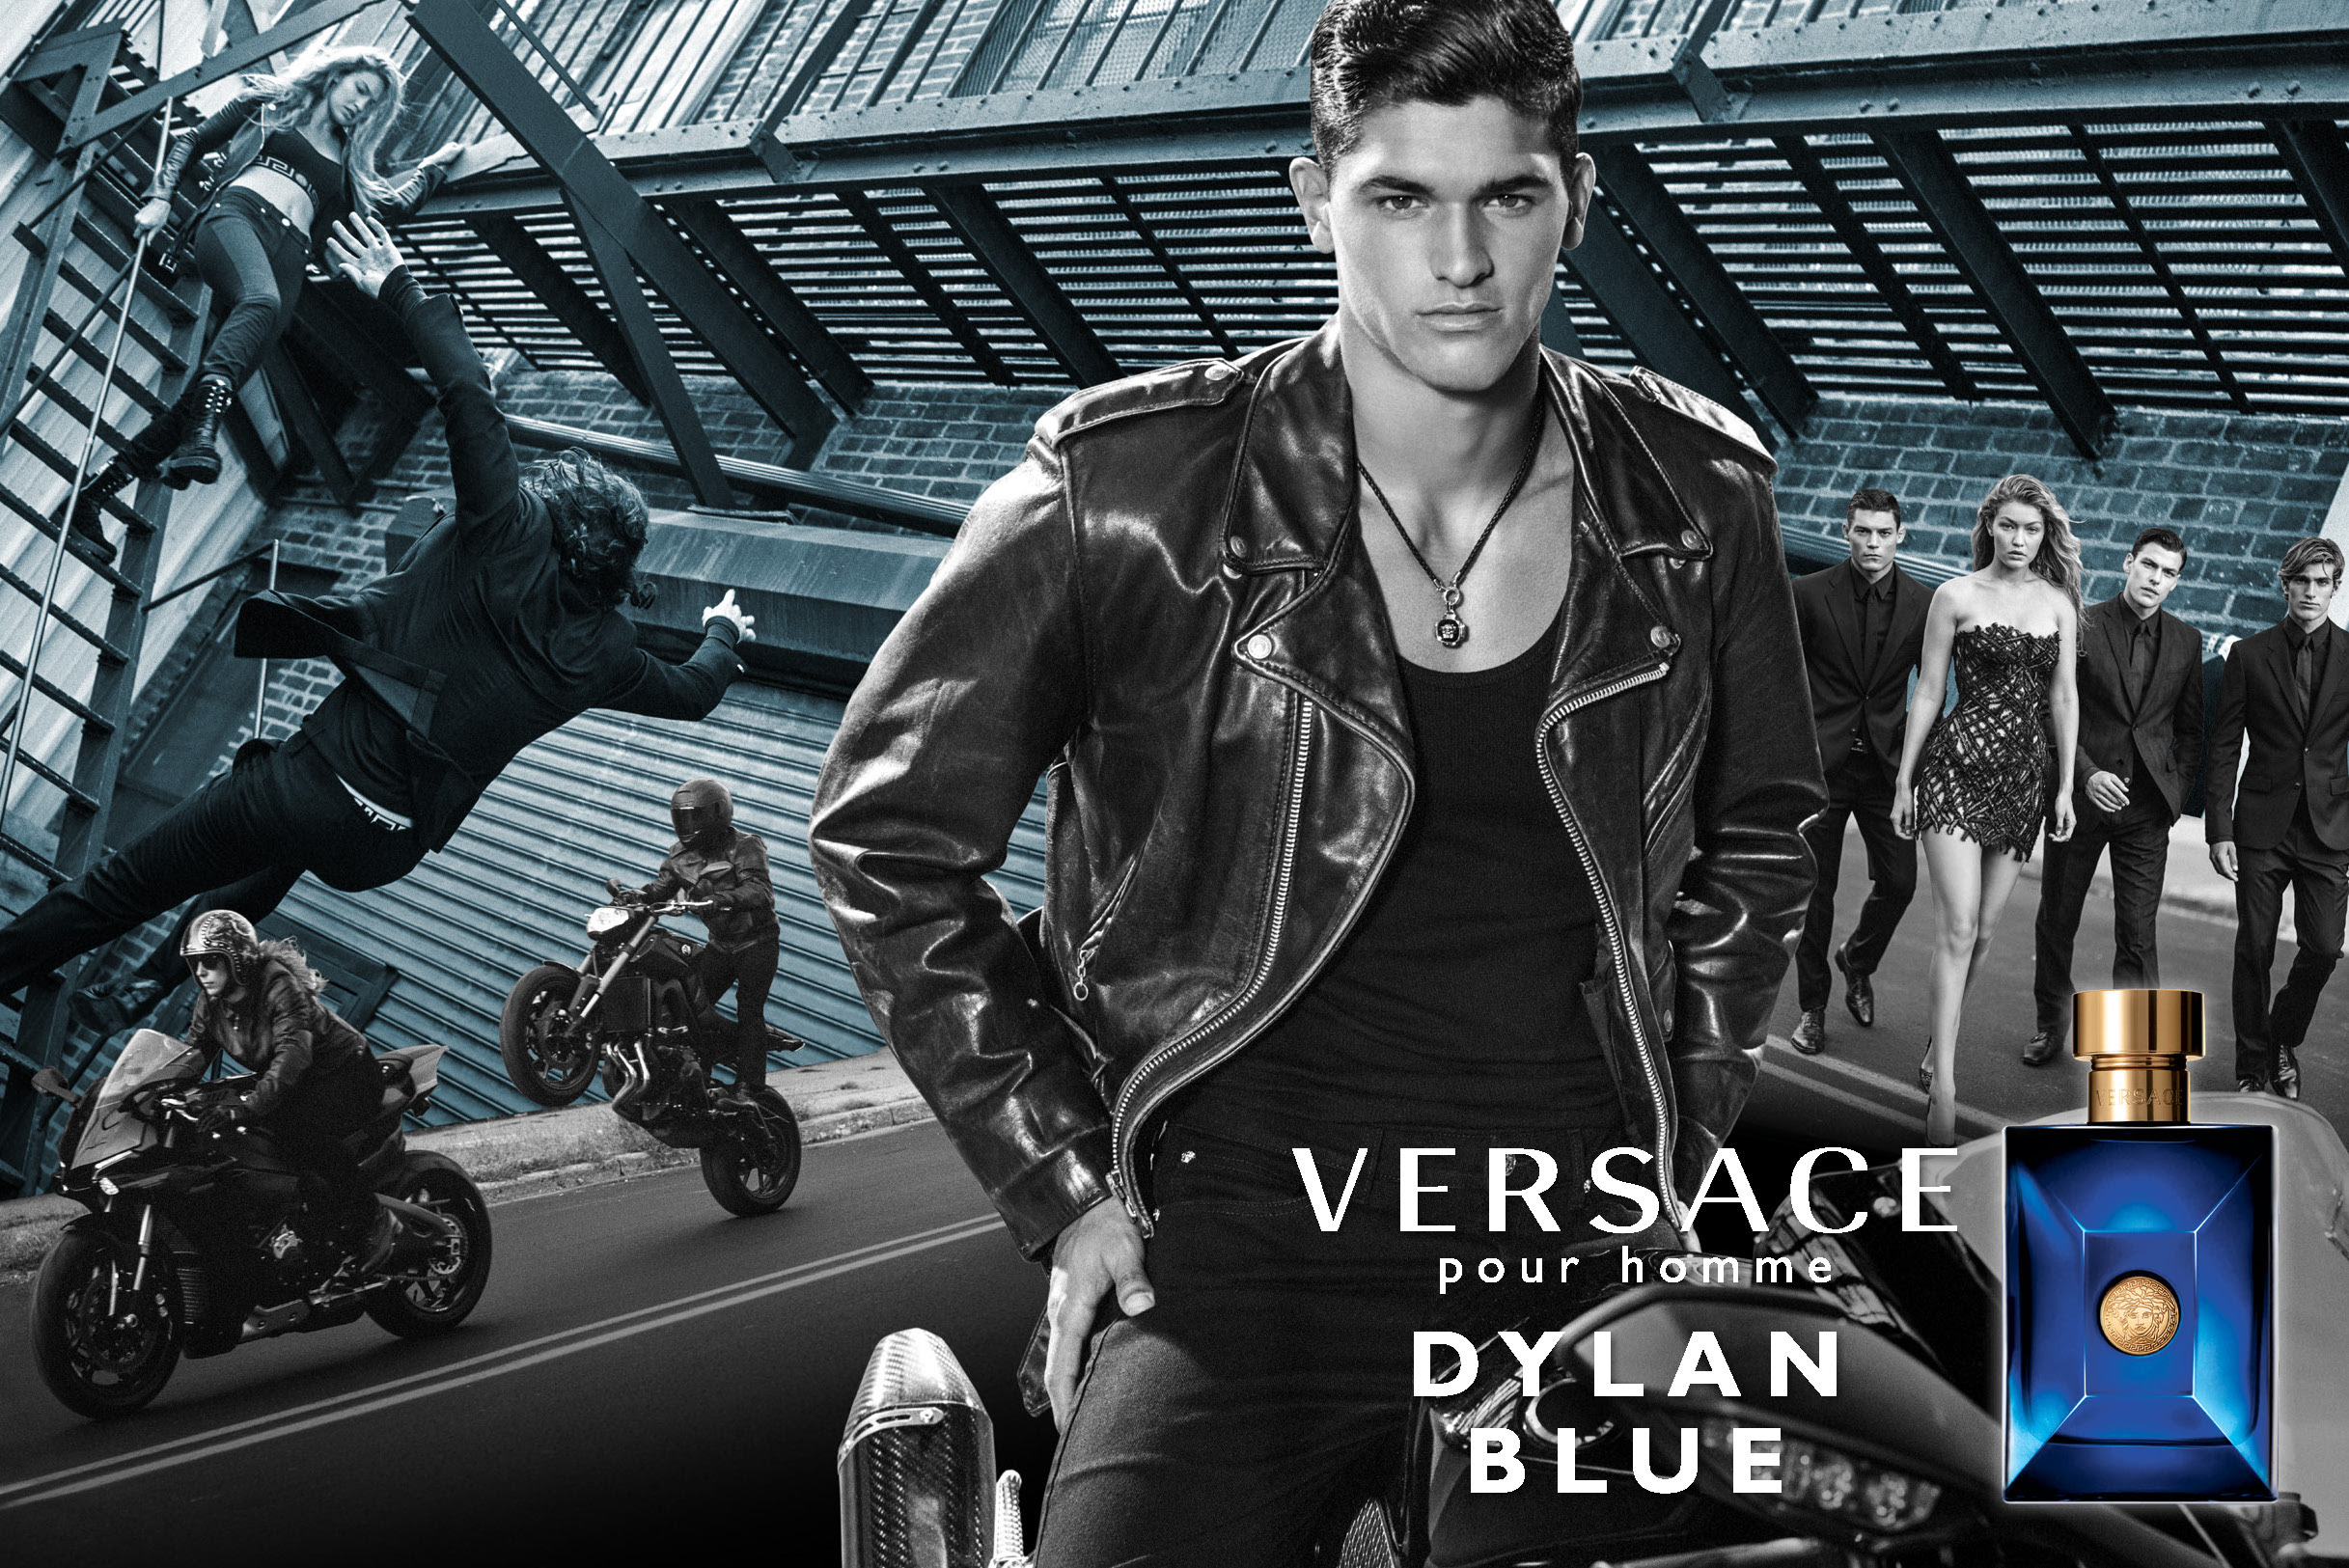 versace-introduces-new-fragrance-dylan-blue